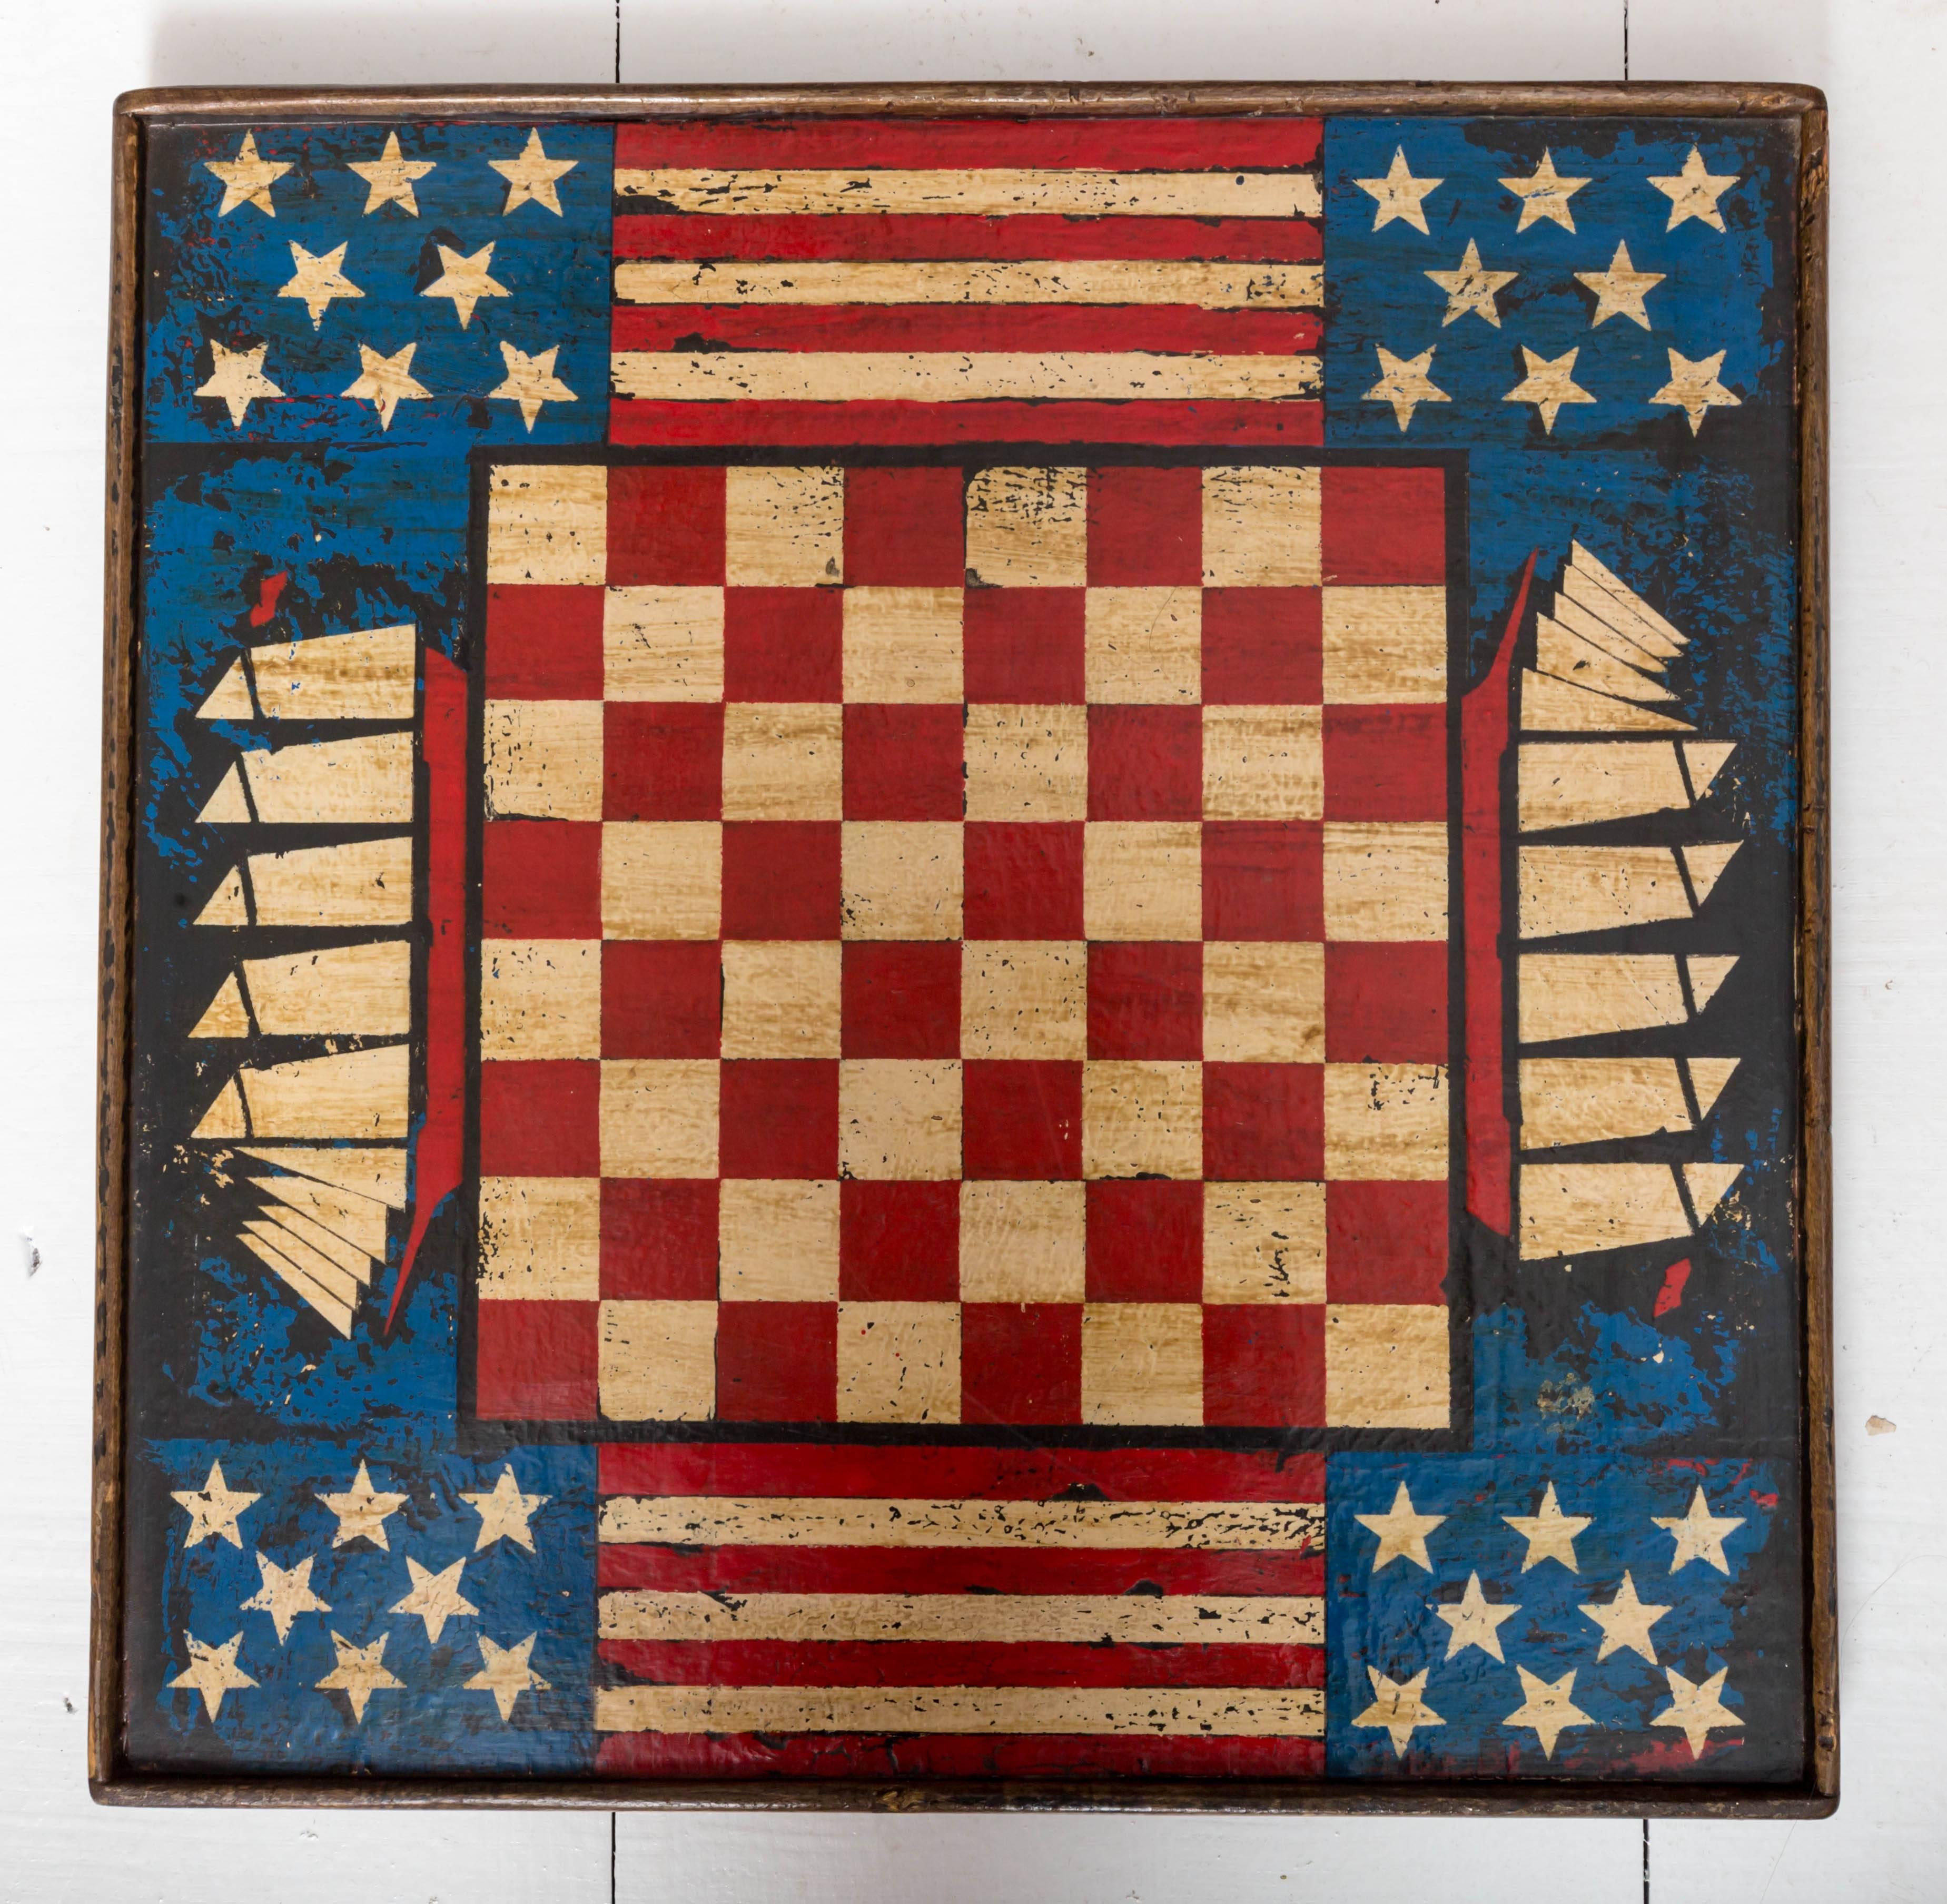 20th Century Vintage Paint Decorated Americana Game Board